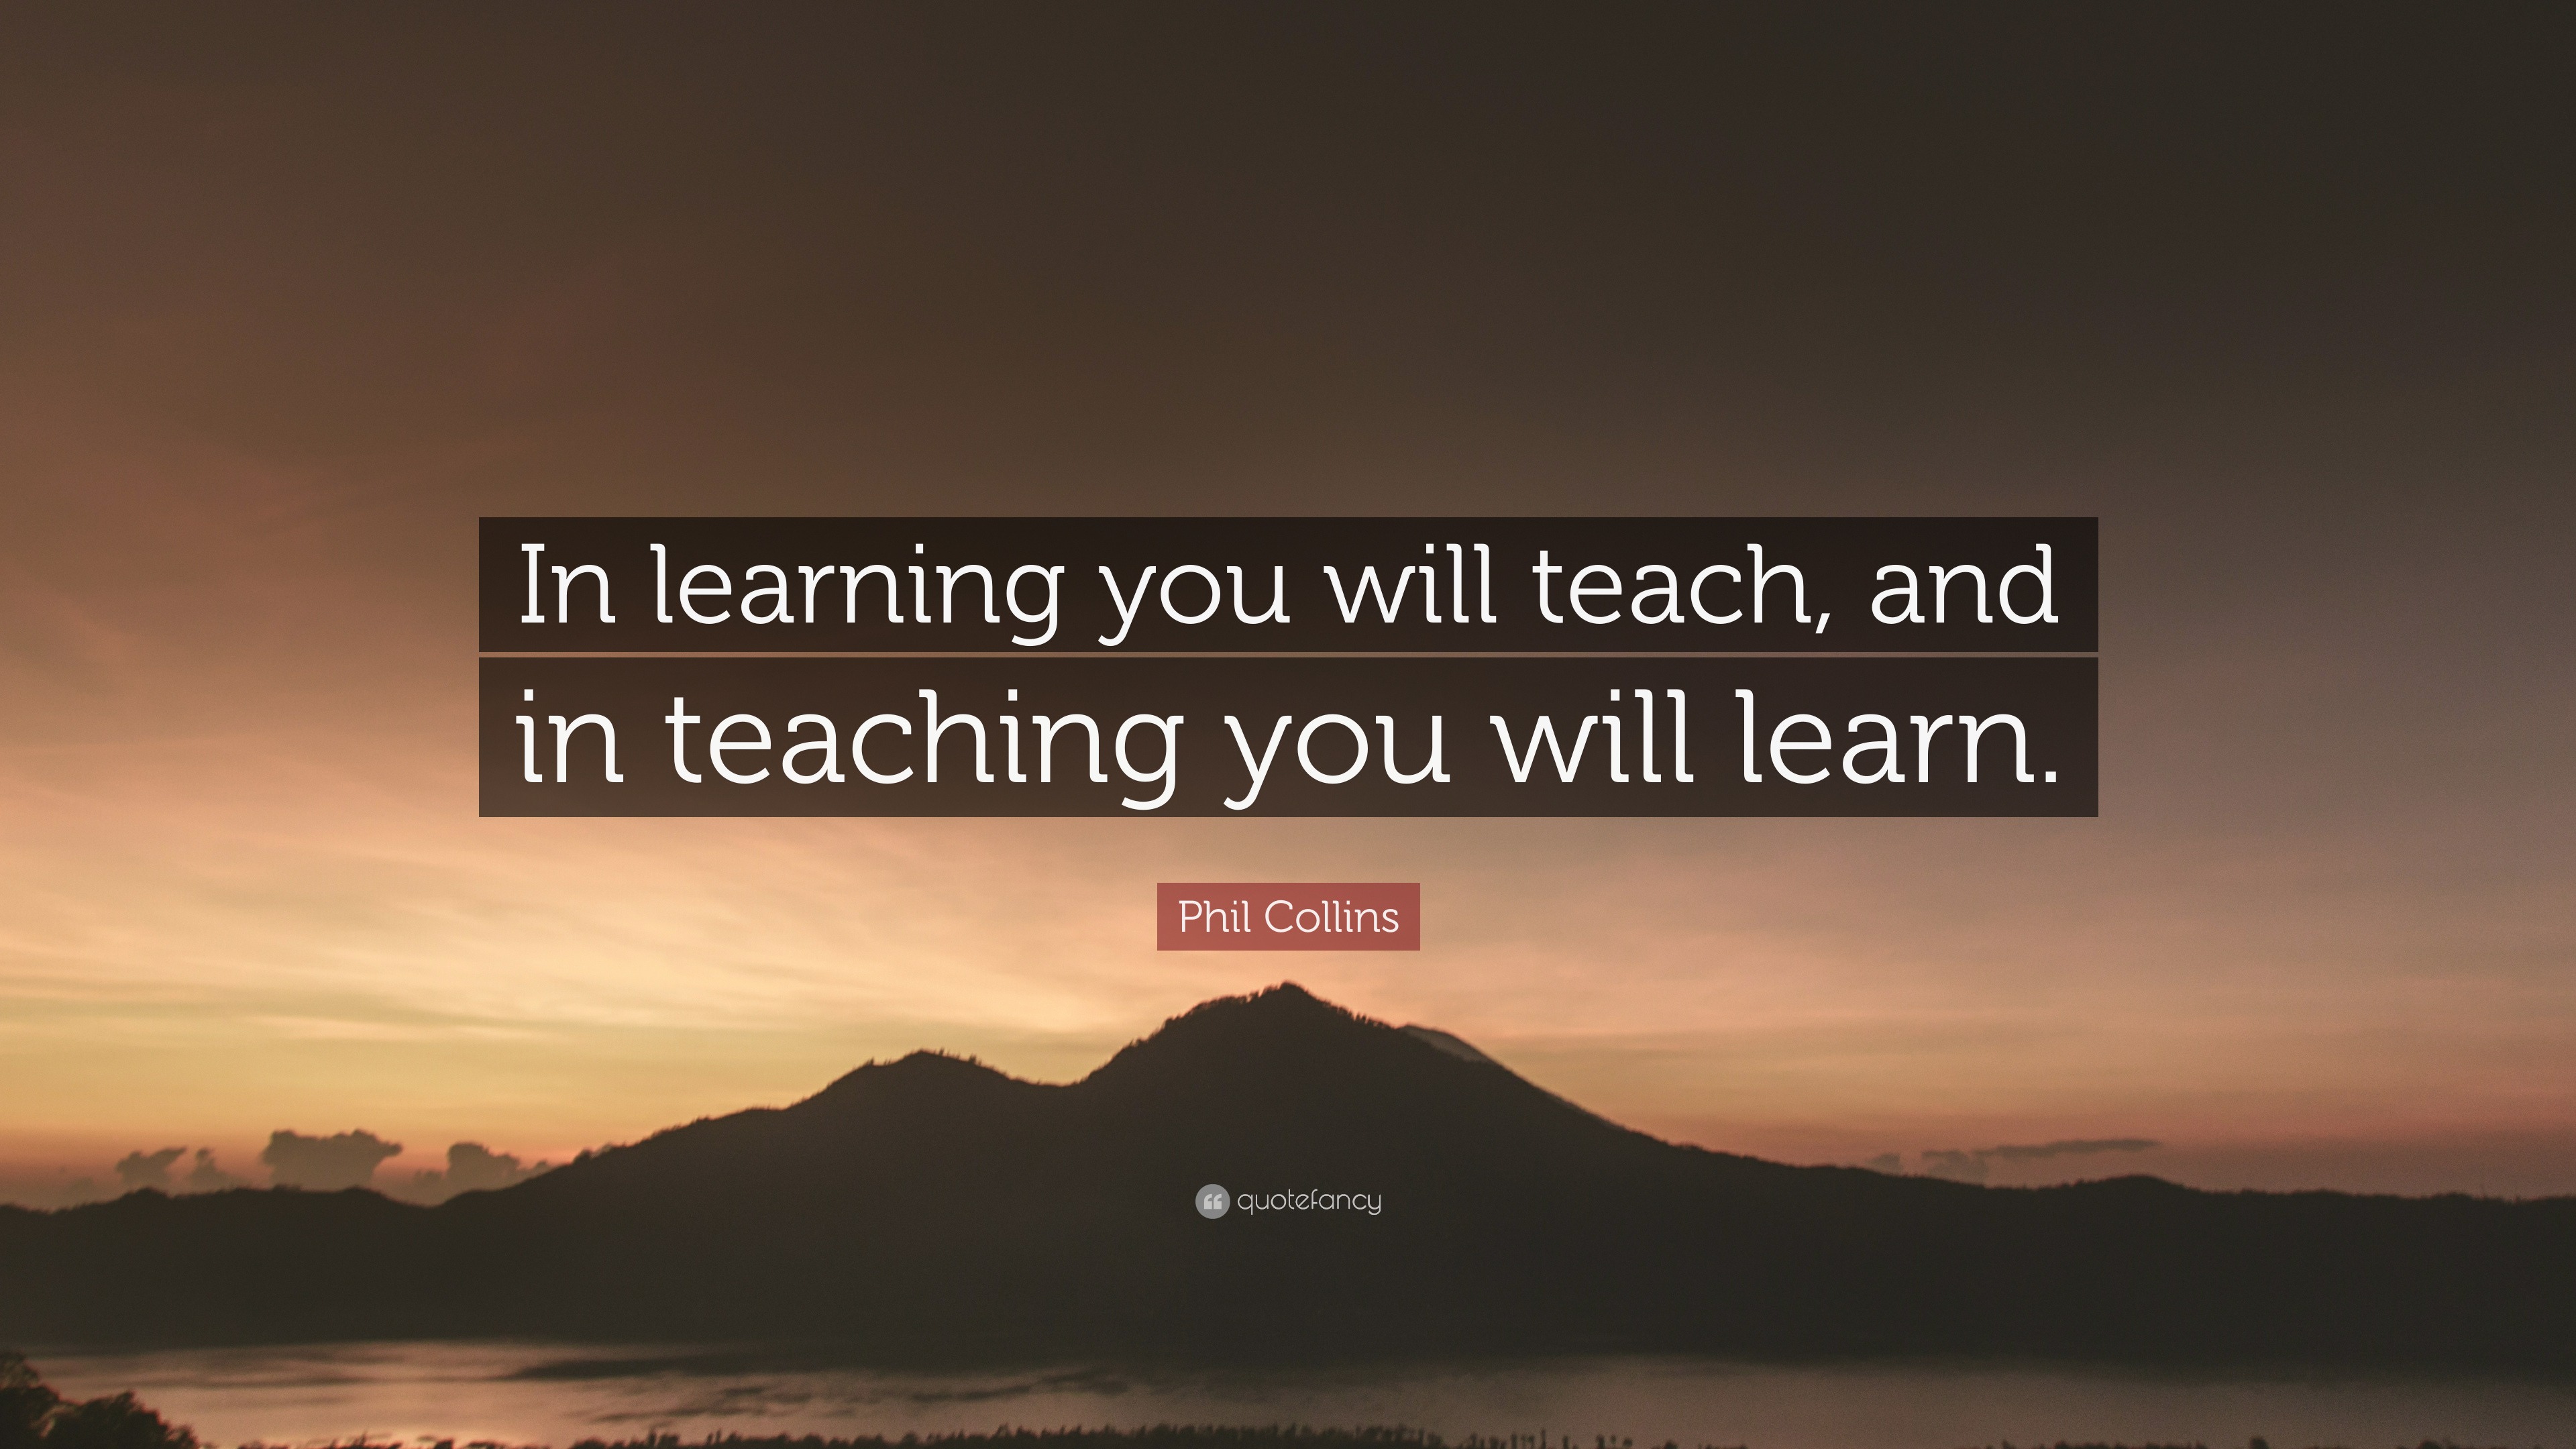 Phil Collins Quote: “In learning you will teach, and in teaching you